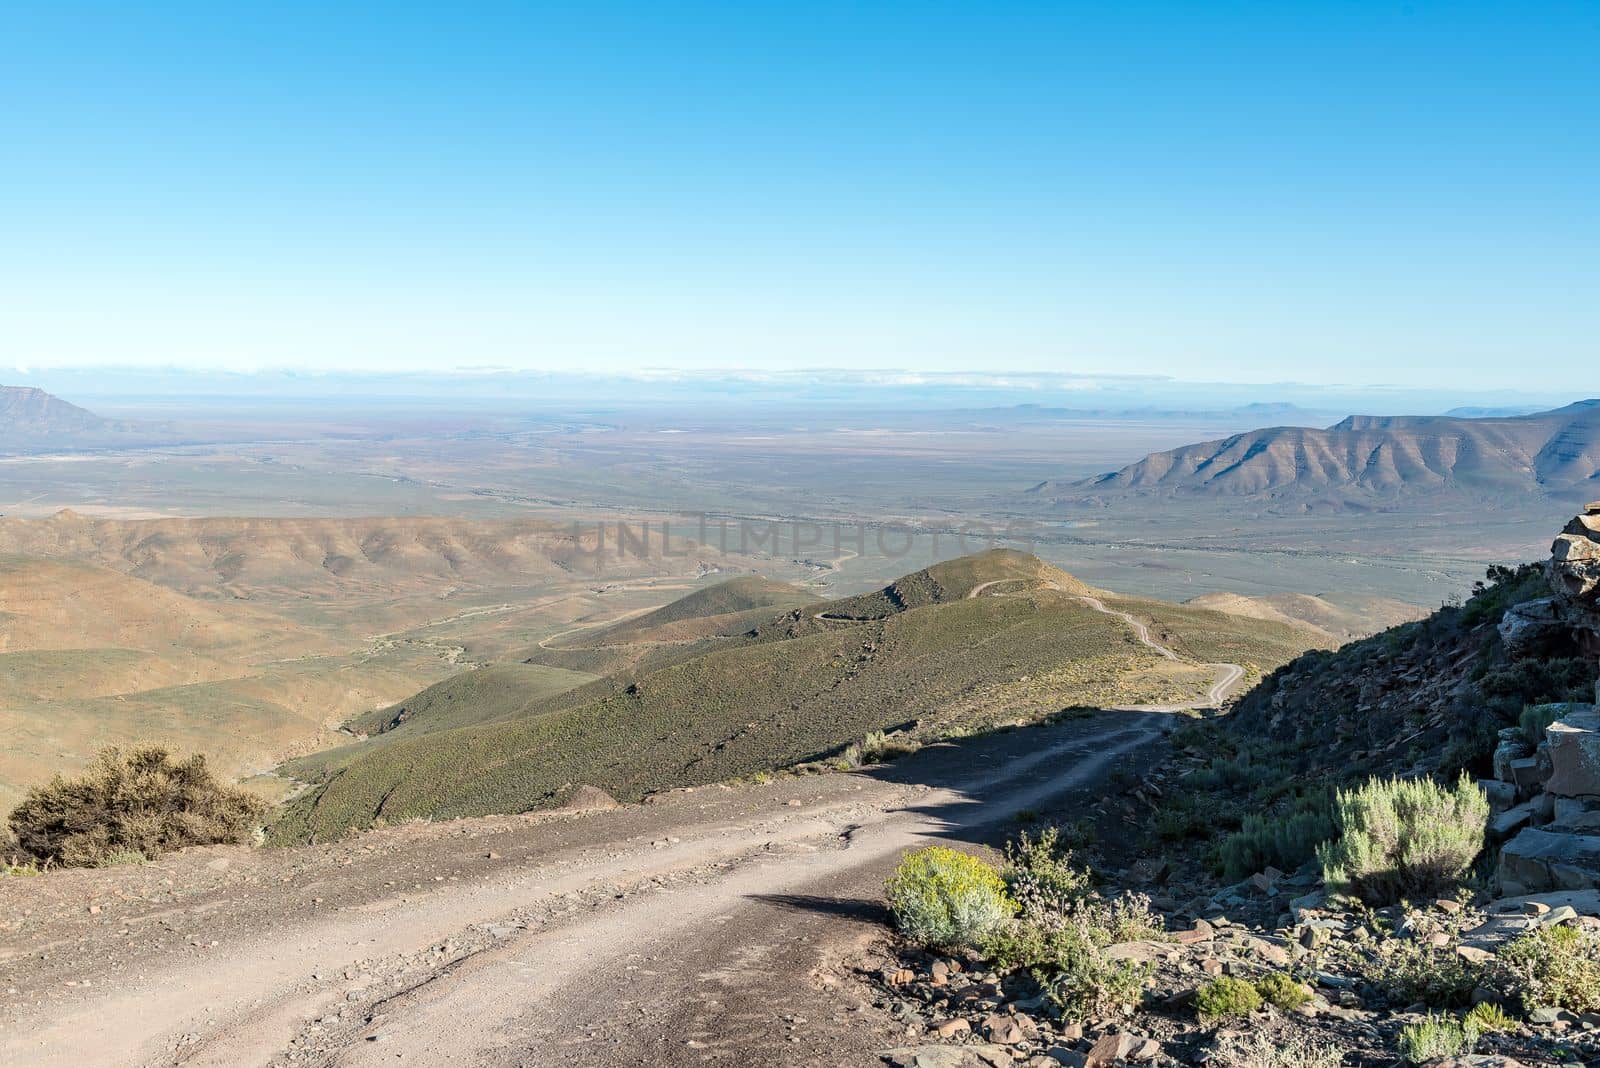 View of the Ouberg Pass near Sutherland in the Northern Cape Karoo